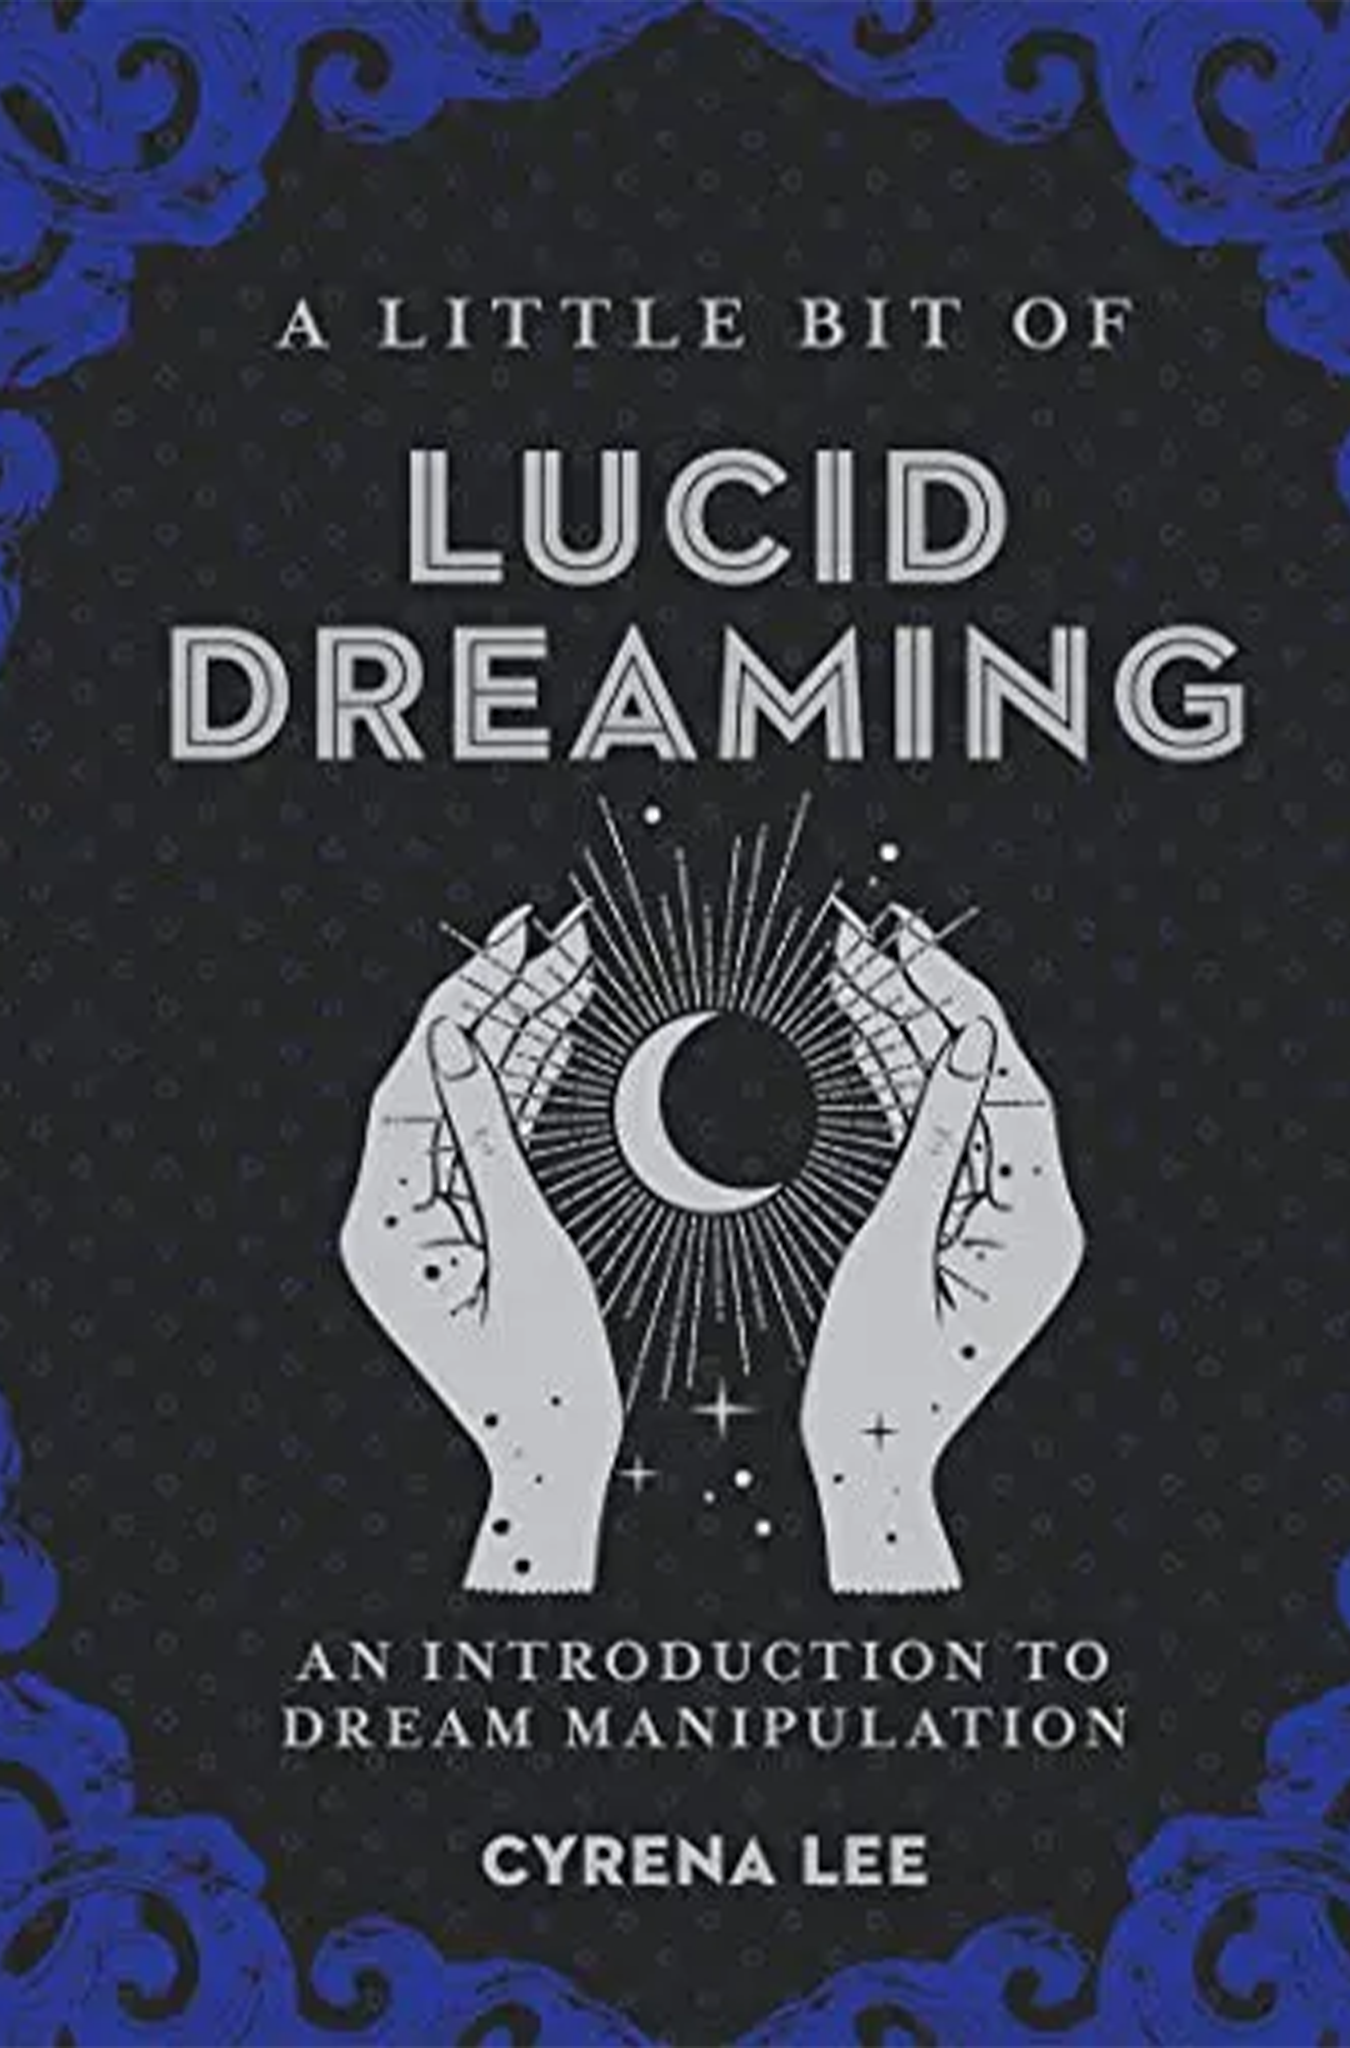 A LITTLE BIT OF LUCID DREAMING: AN INTRODUCTION TO DREAM MANIPULATION